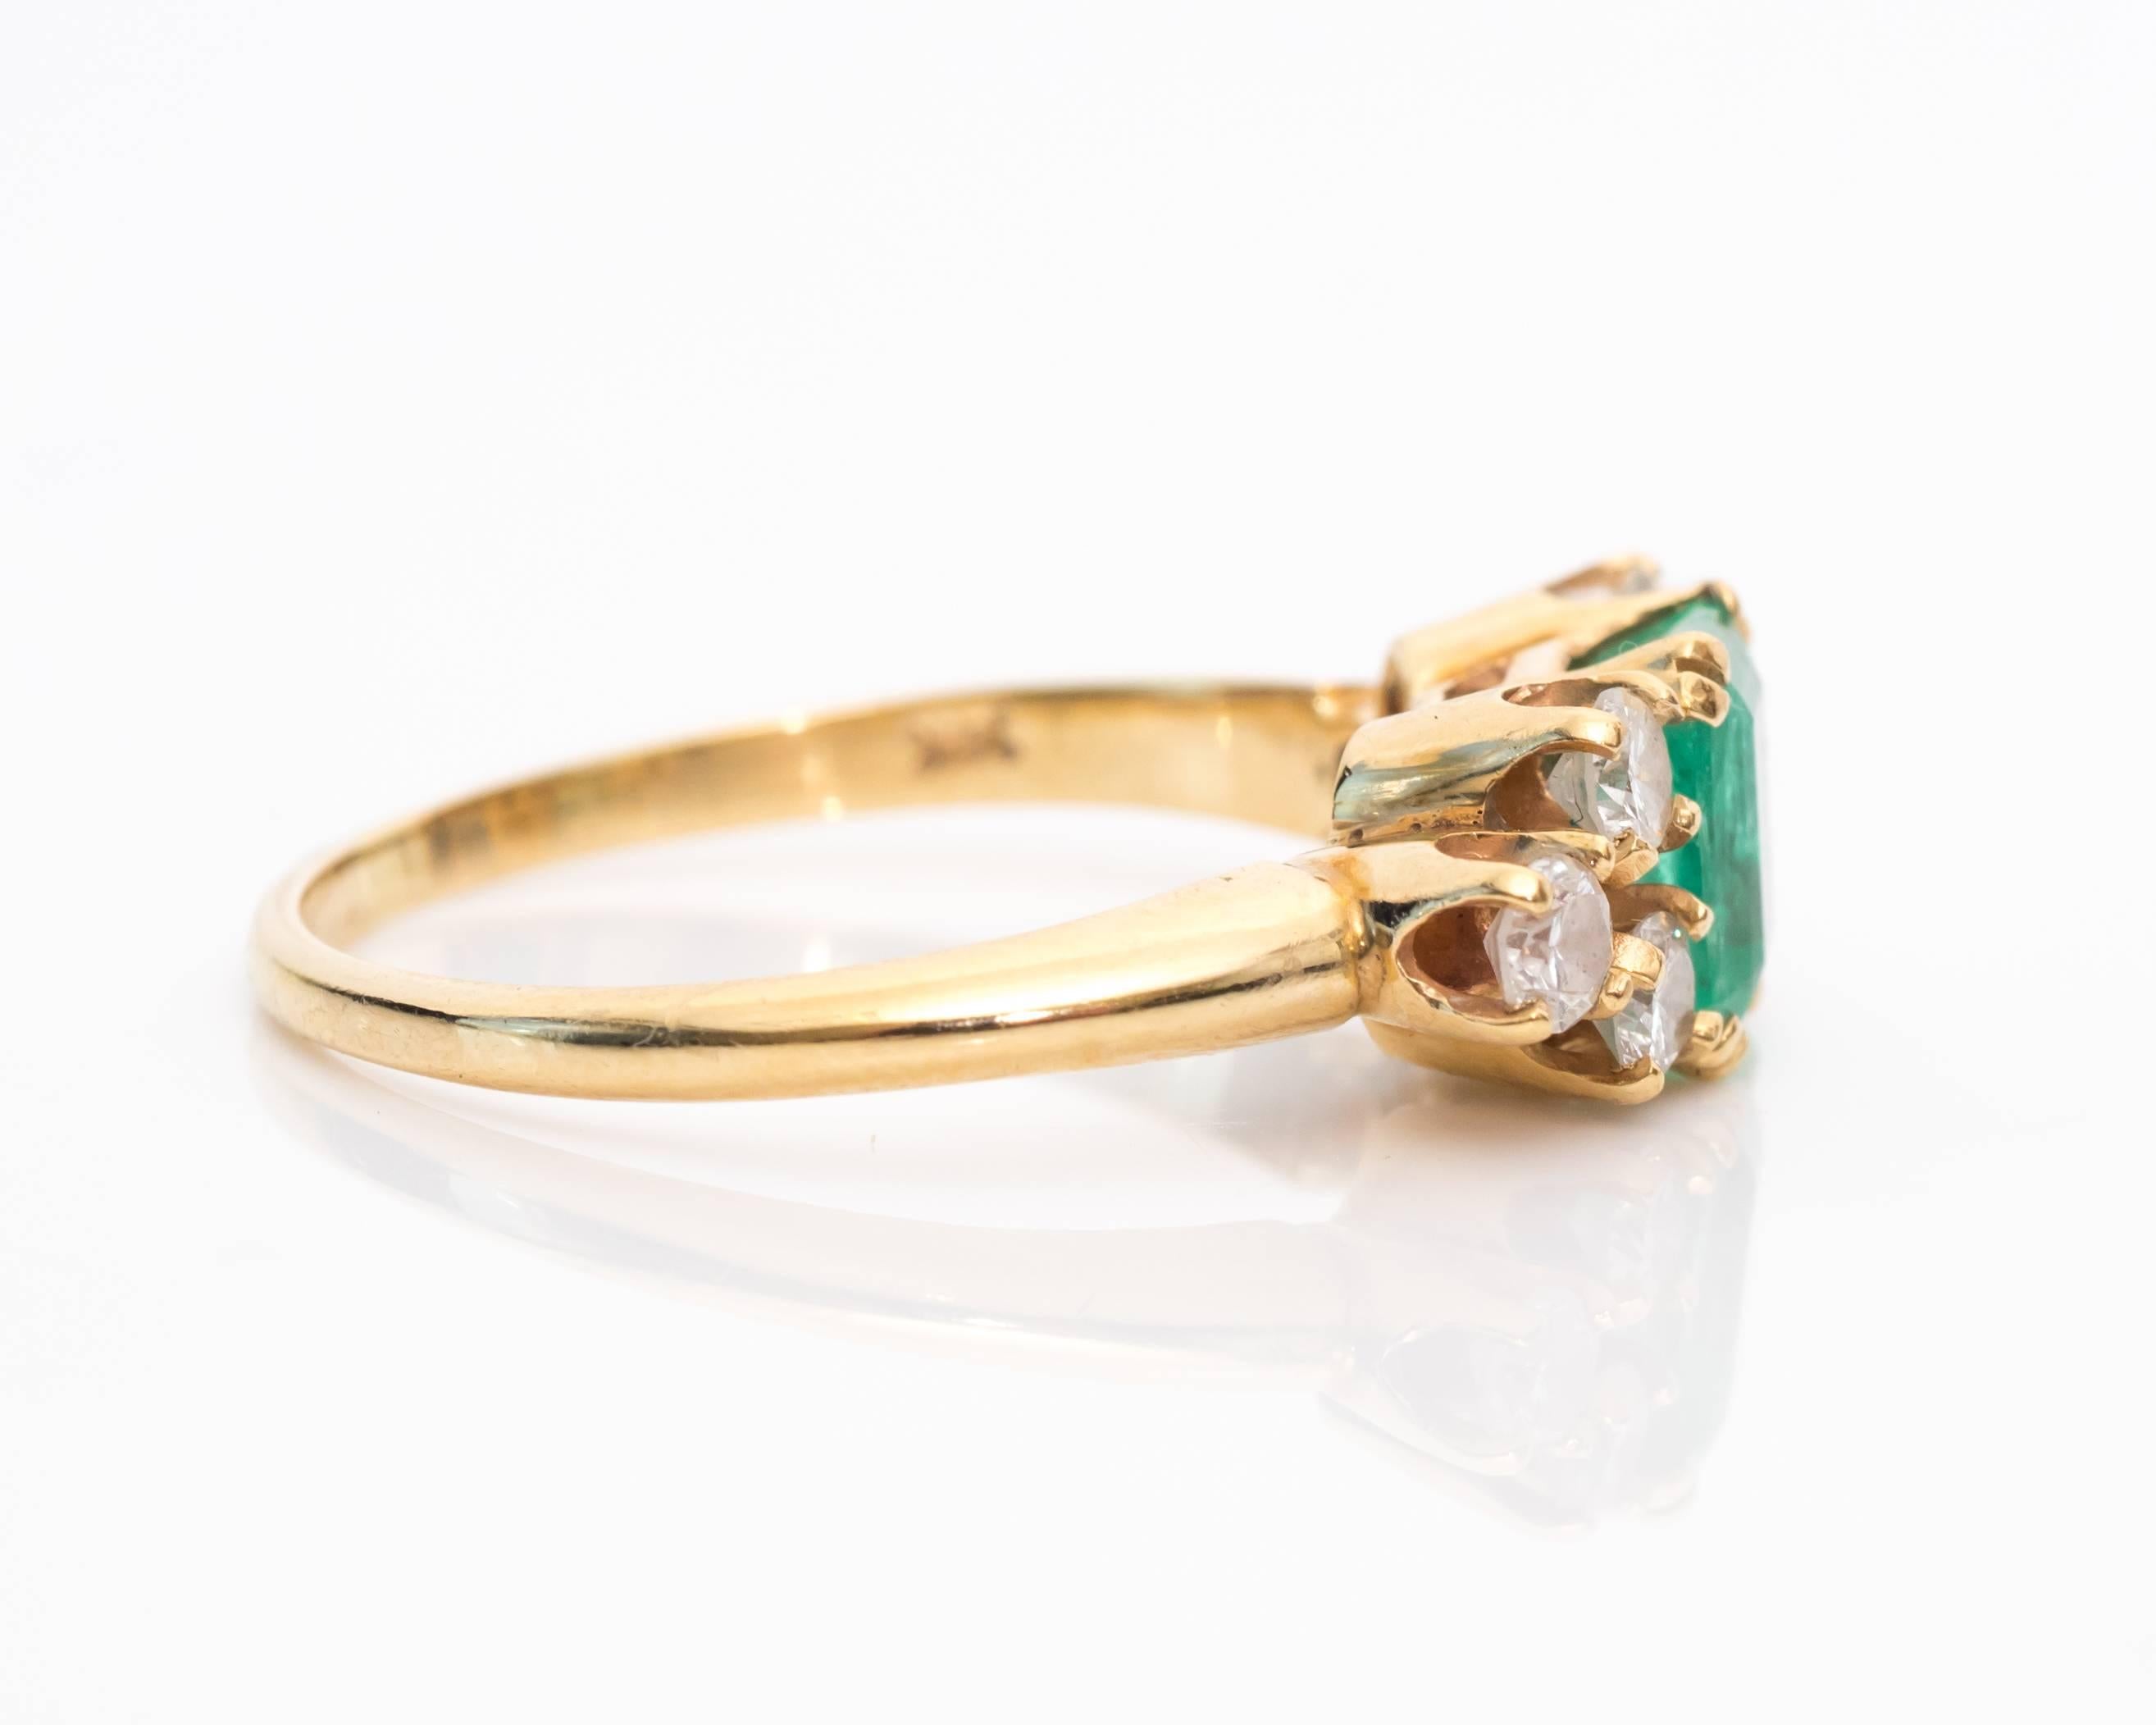 Gorgeous Colombian Emerald and Diamond Ring
Natural Colombian Emerald, only treated with oils.
Original Birthmarks and Fractures still visible in the Emerald 
Mounted in Four-Prong Set 
Six Additional Accent Diamonds, Also mounted in Four-Prong